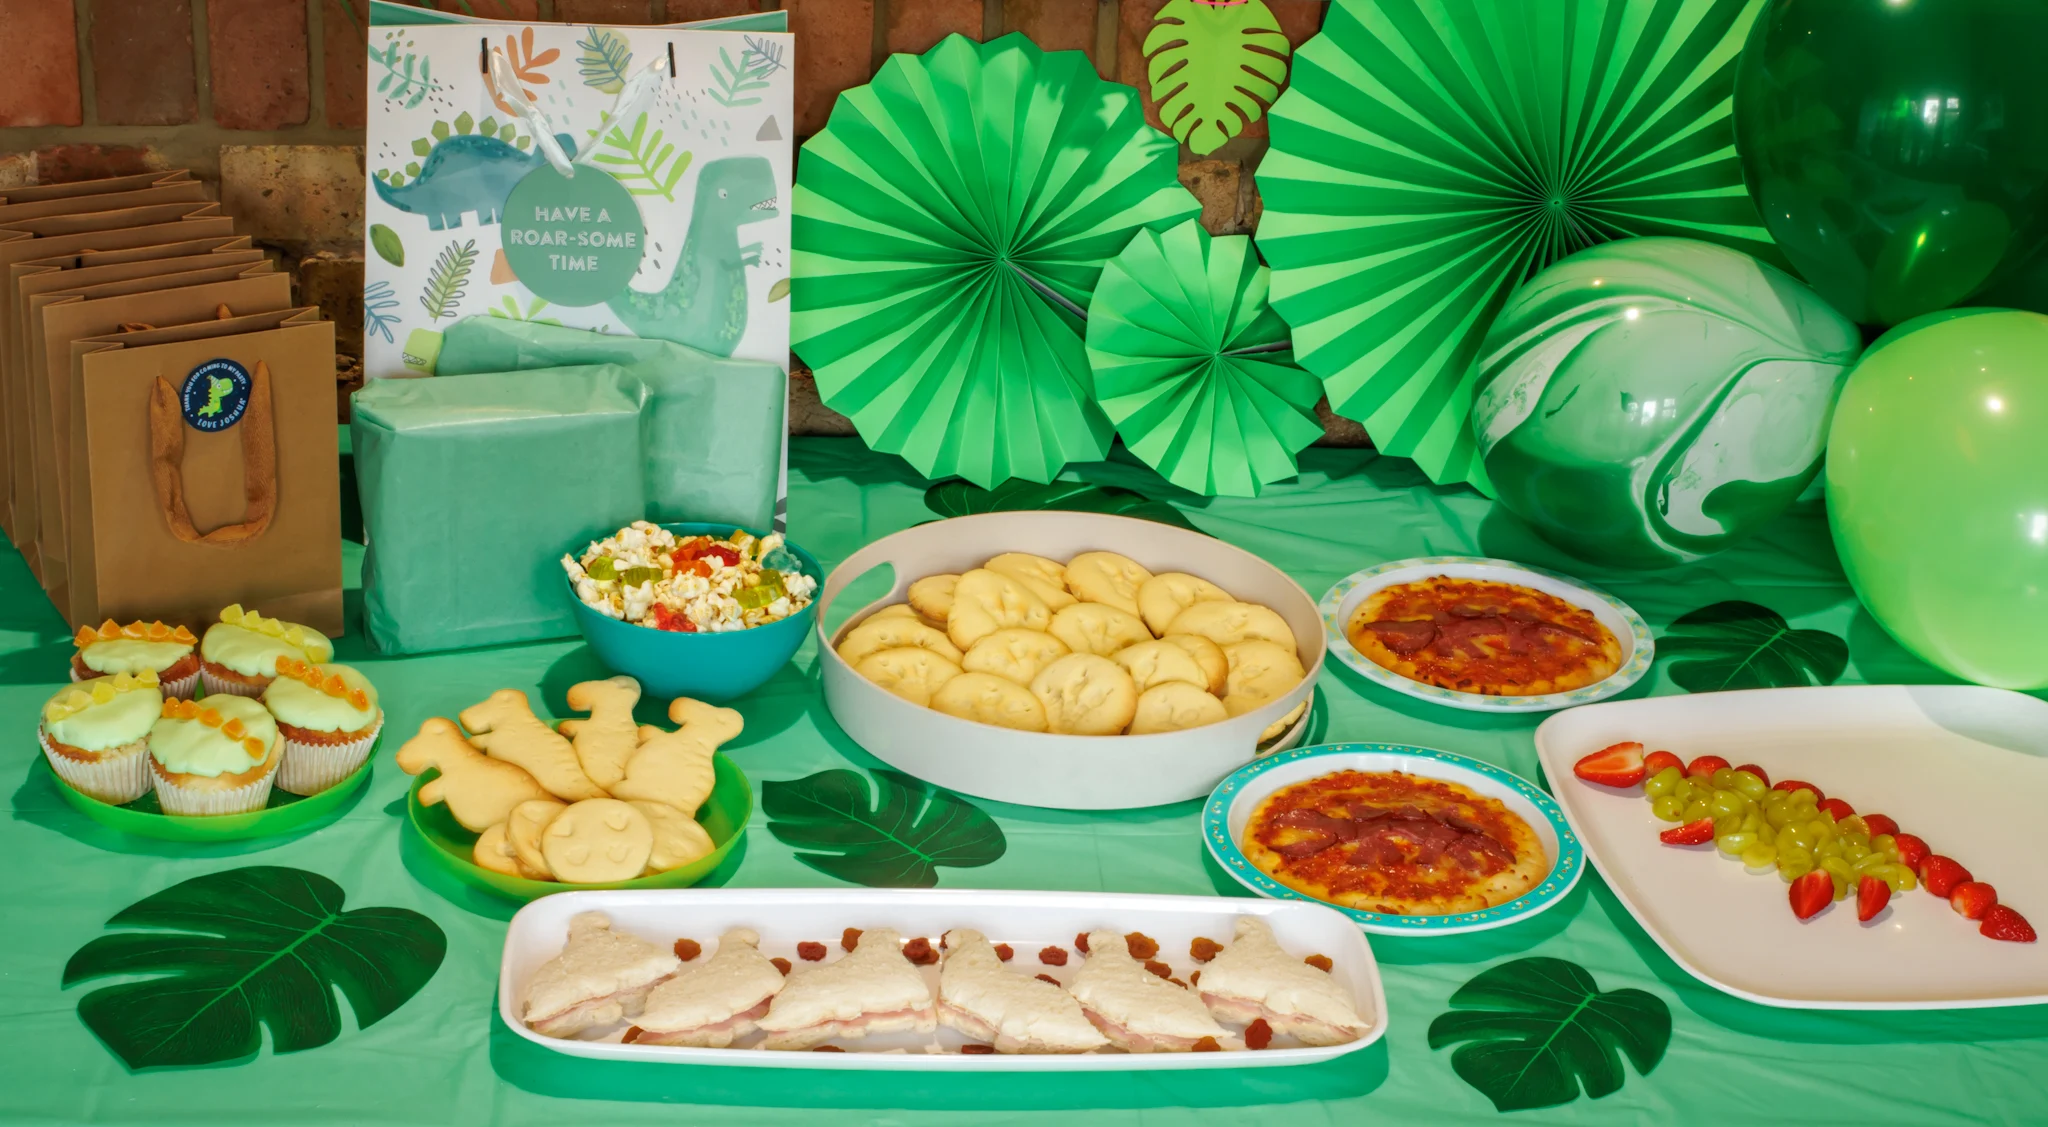 a table with dinosaur themed food, presents, balloons, green tablecloth and leaves